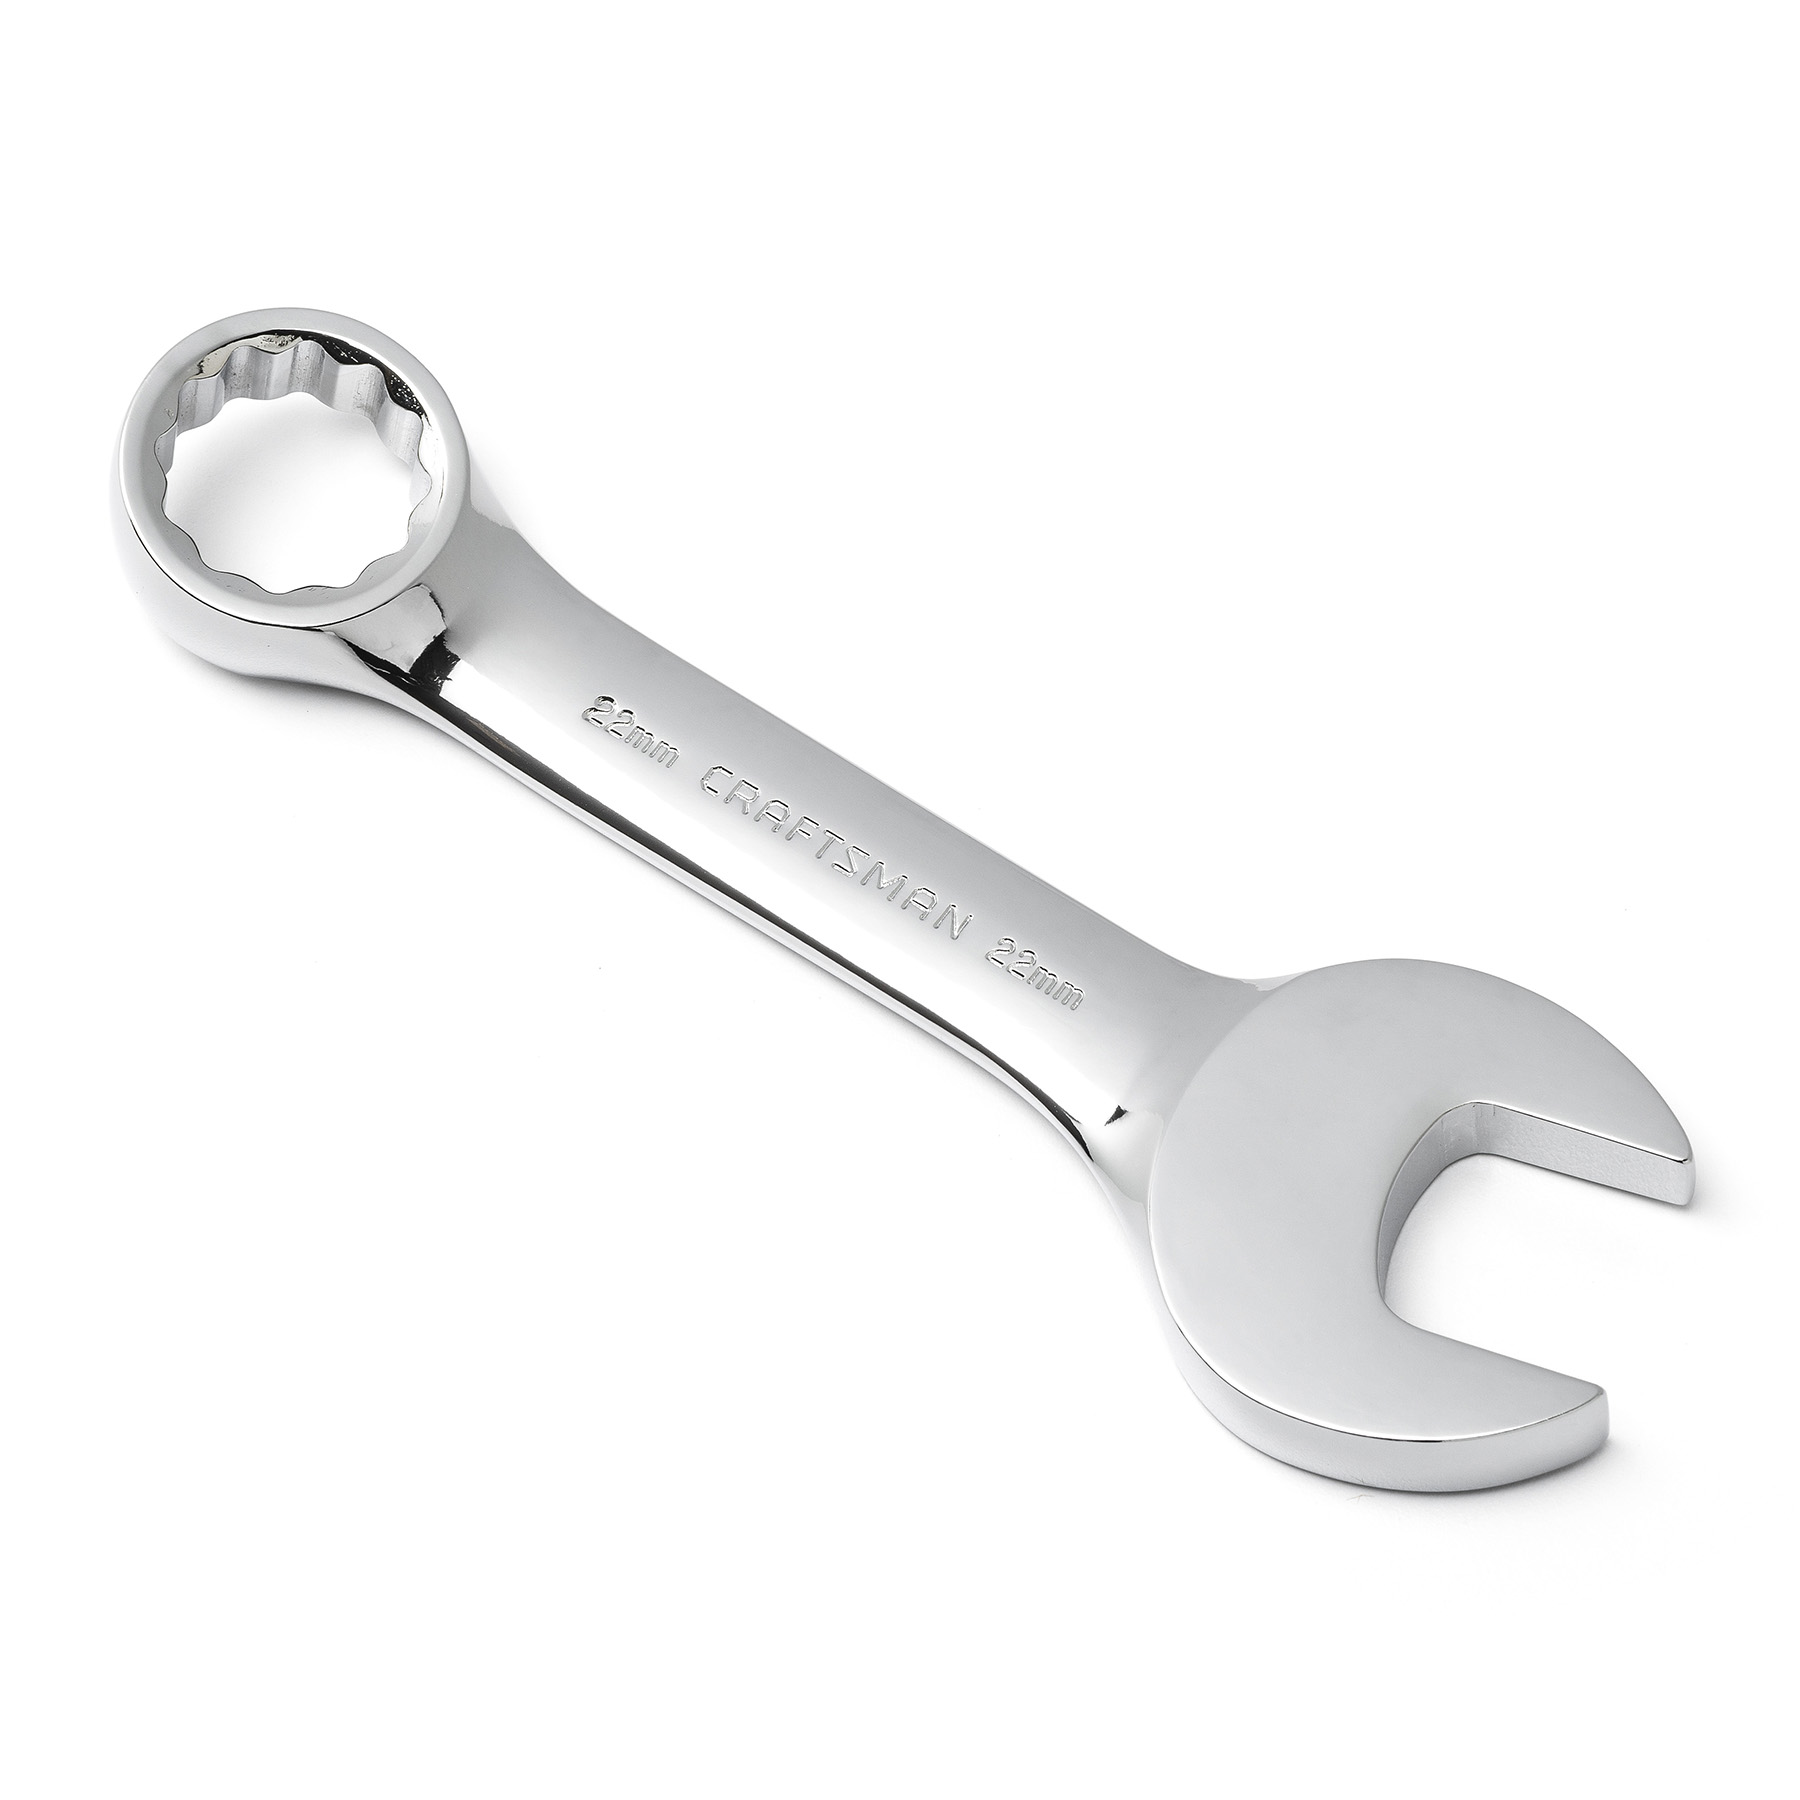 Craftsman 22mm Full Polish Stubby Wrench, 12 pt. Combination